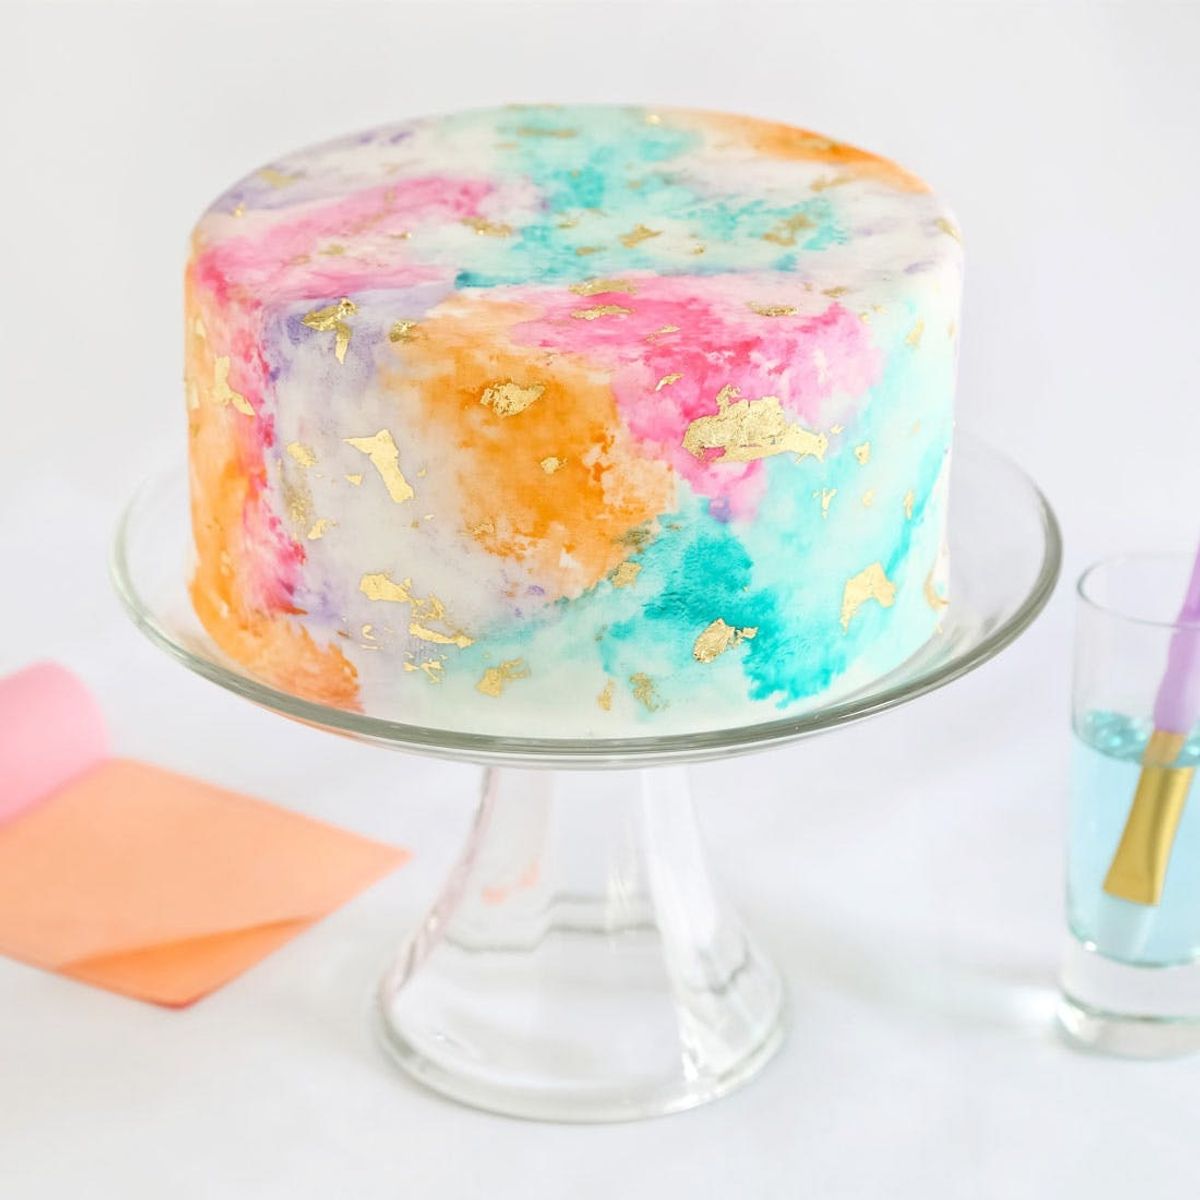 How to Make a Gilded Watercolor Cake That Will Majorly Impress Your Guests